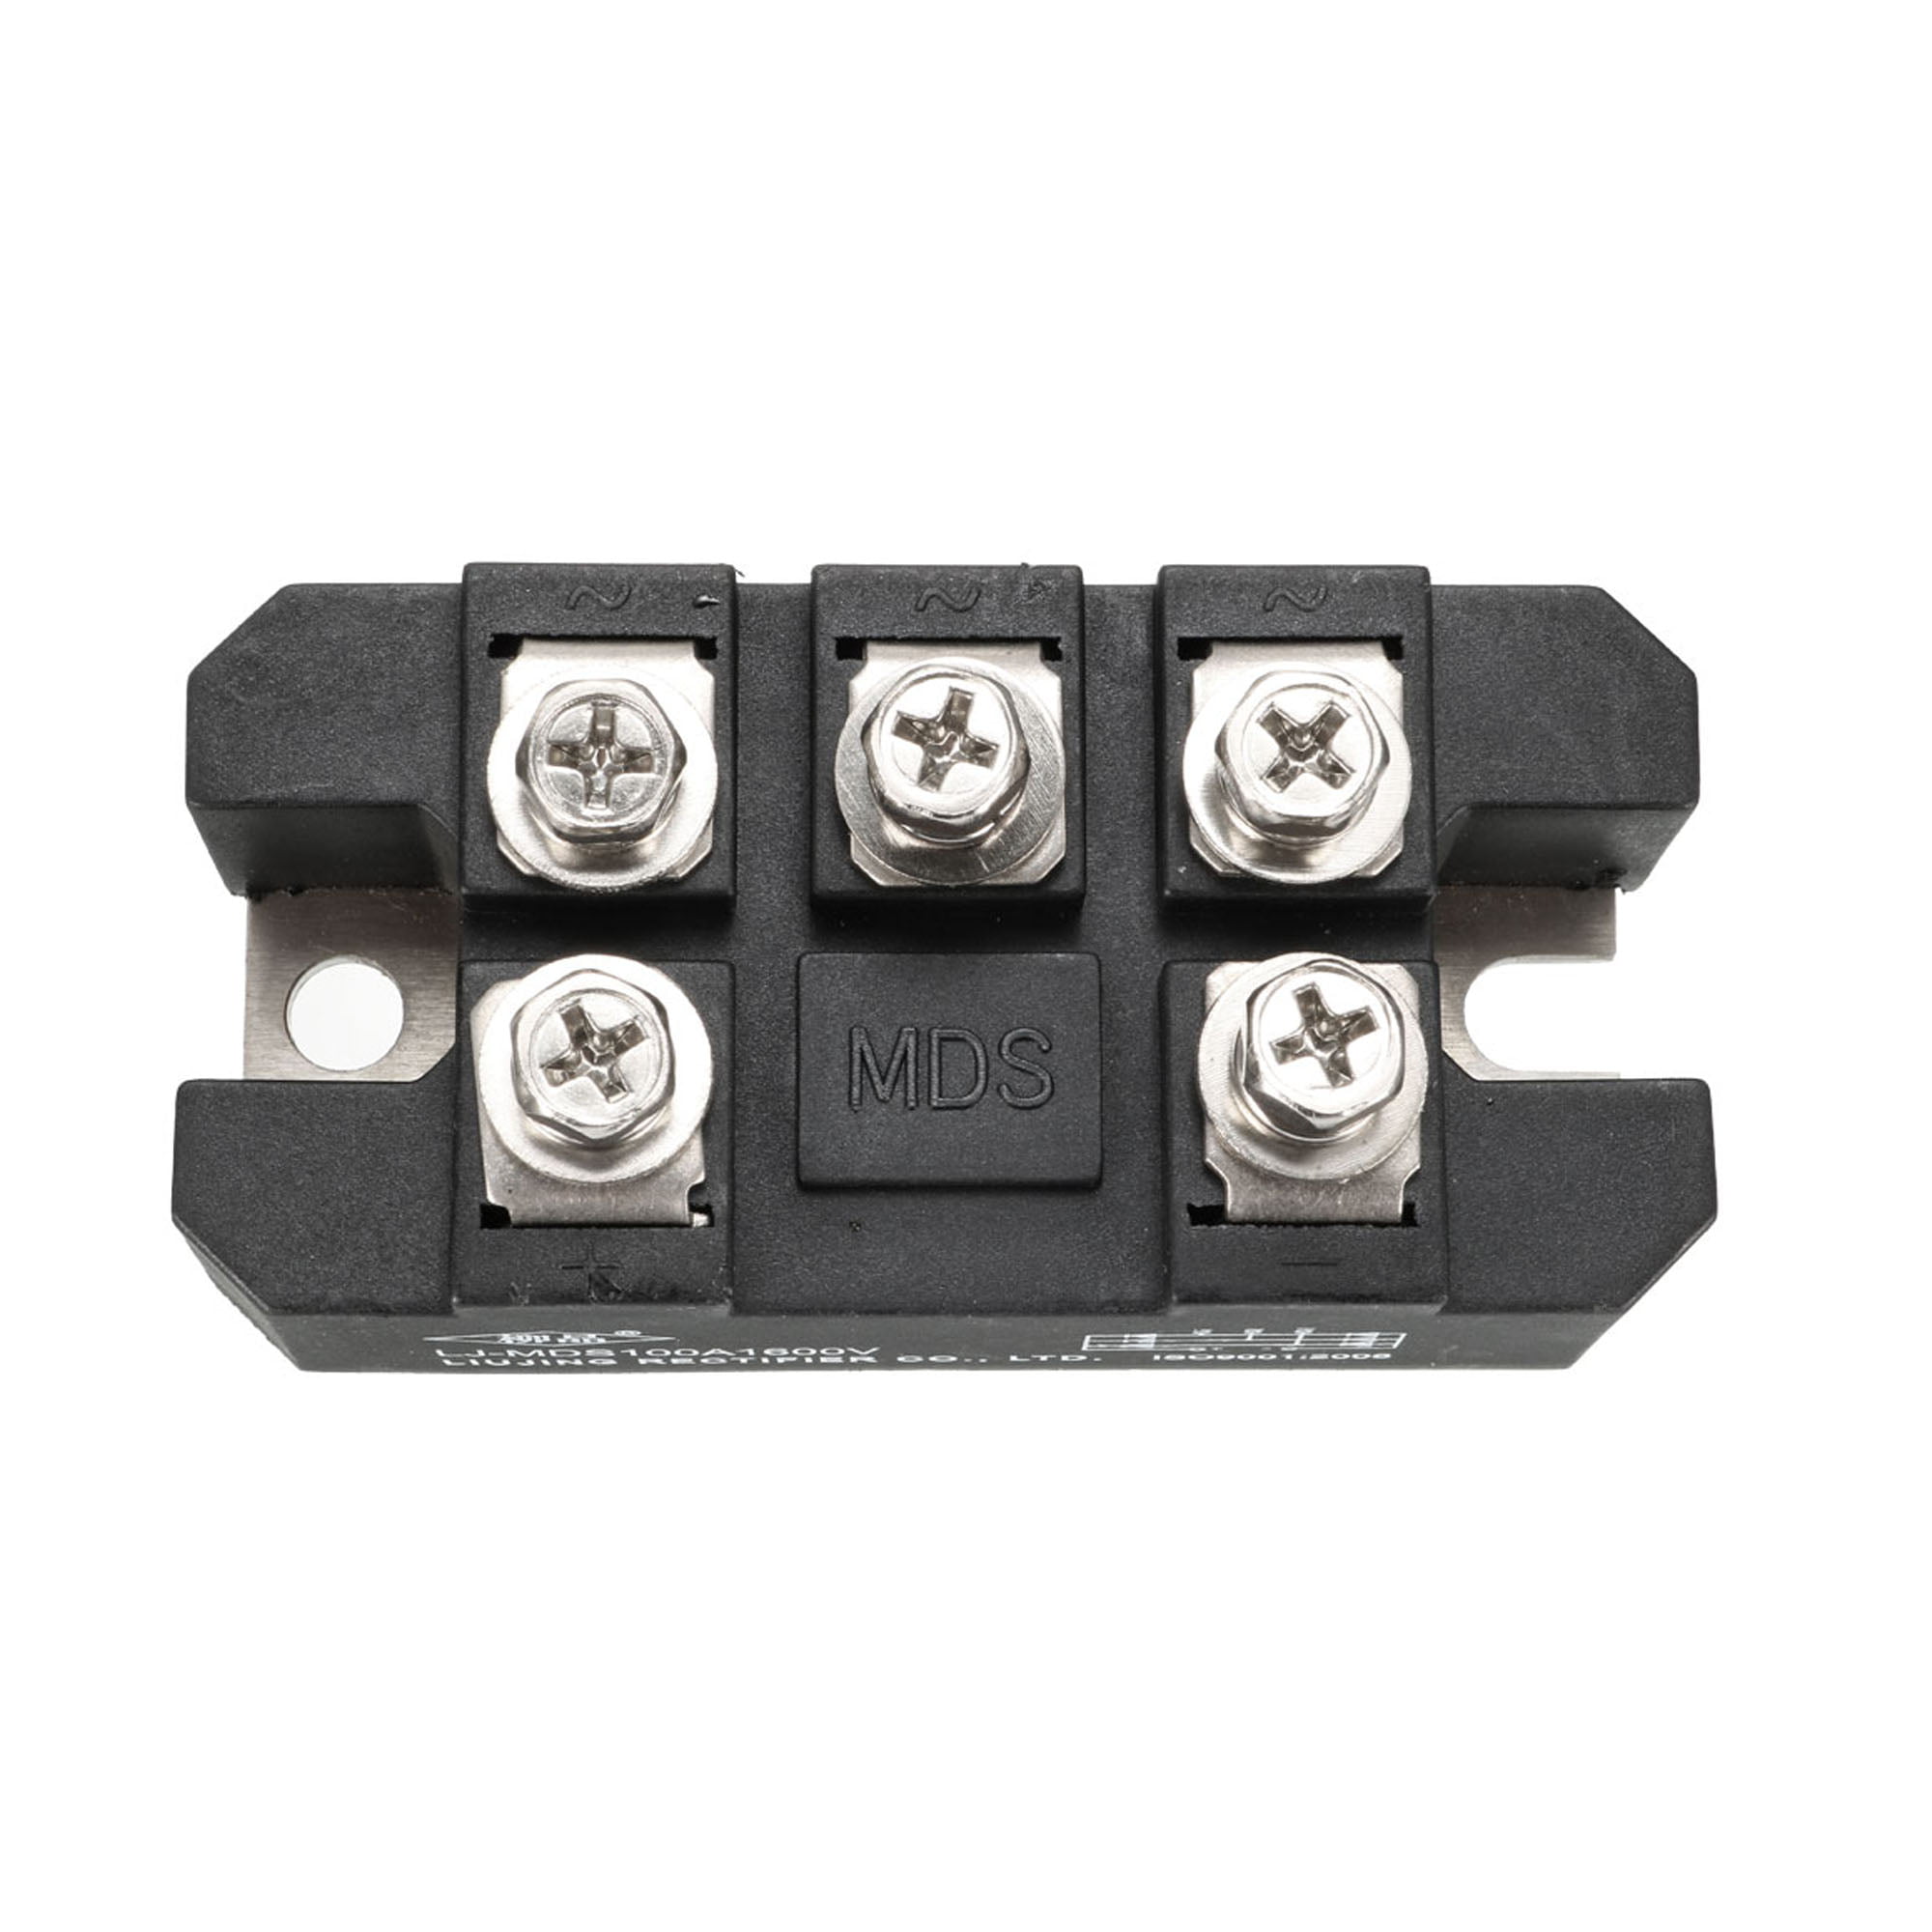 Diode Bridge Rectifier Module 3 Phase MDS-100A 1600V 5 Terminals Diode Module Bridge Rectifier Power Module Supply for Three-Phase Rectification 